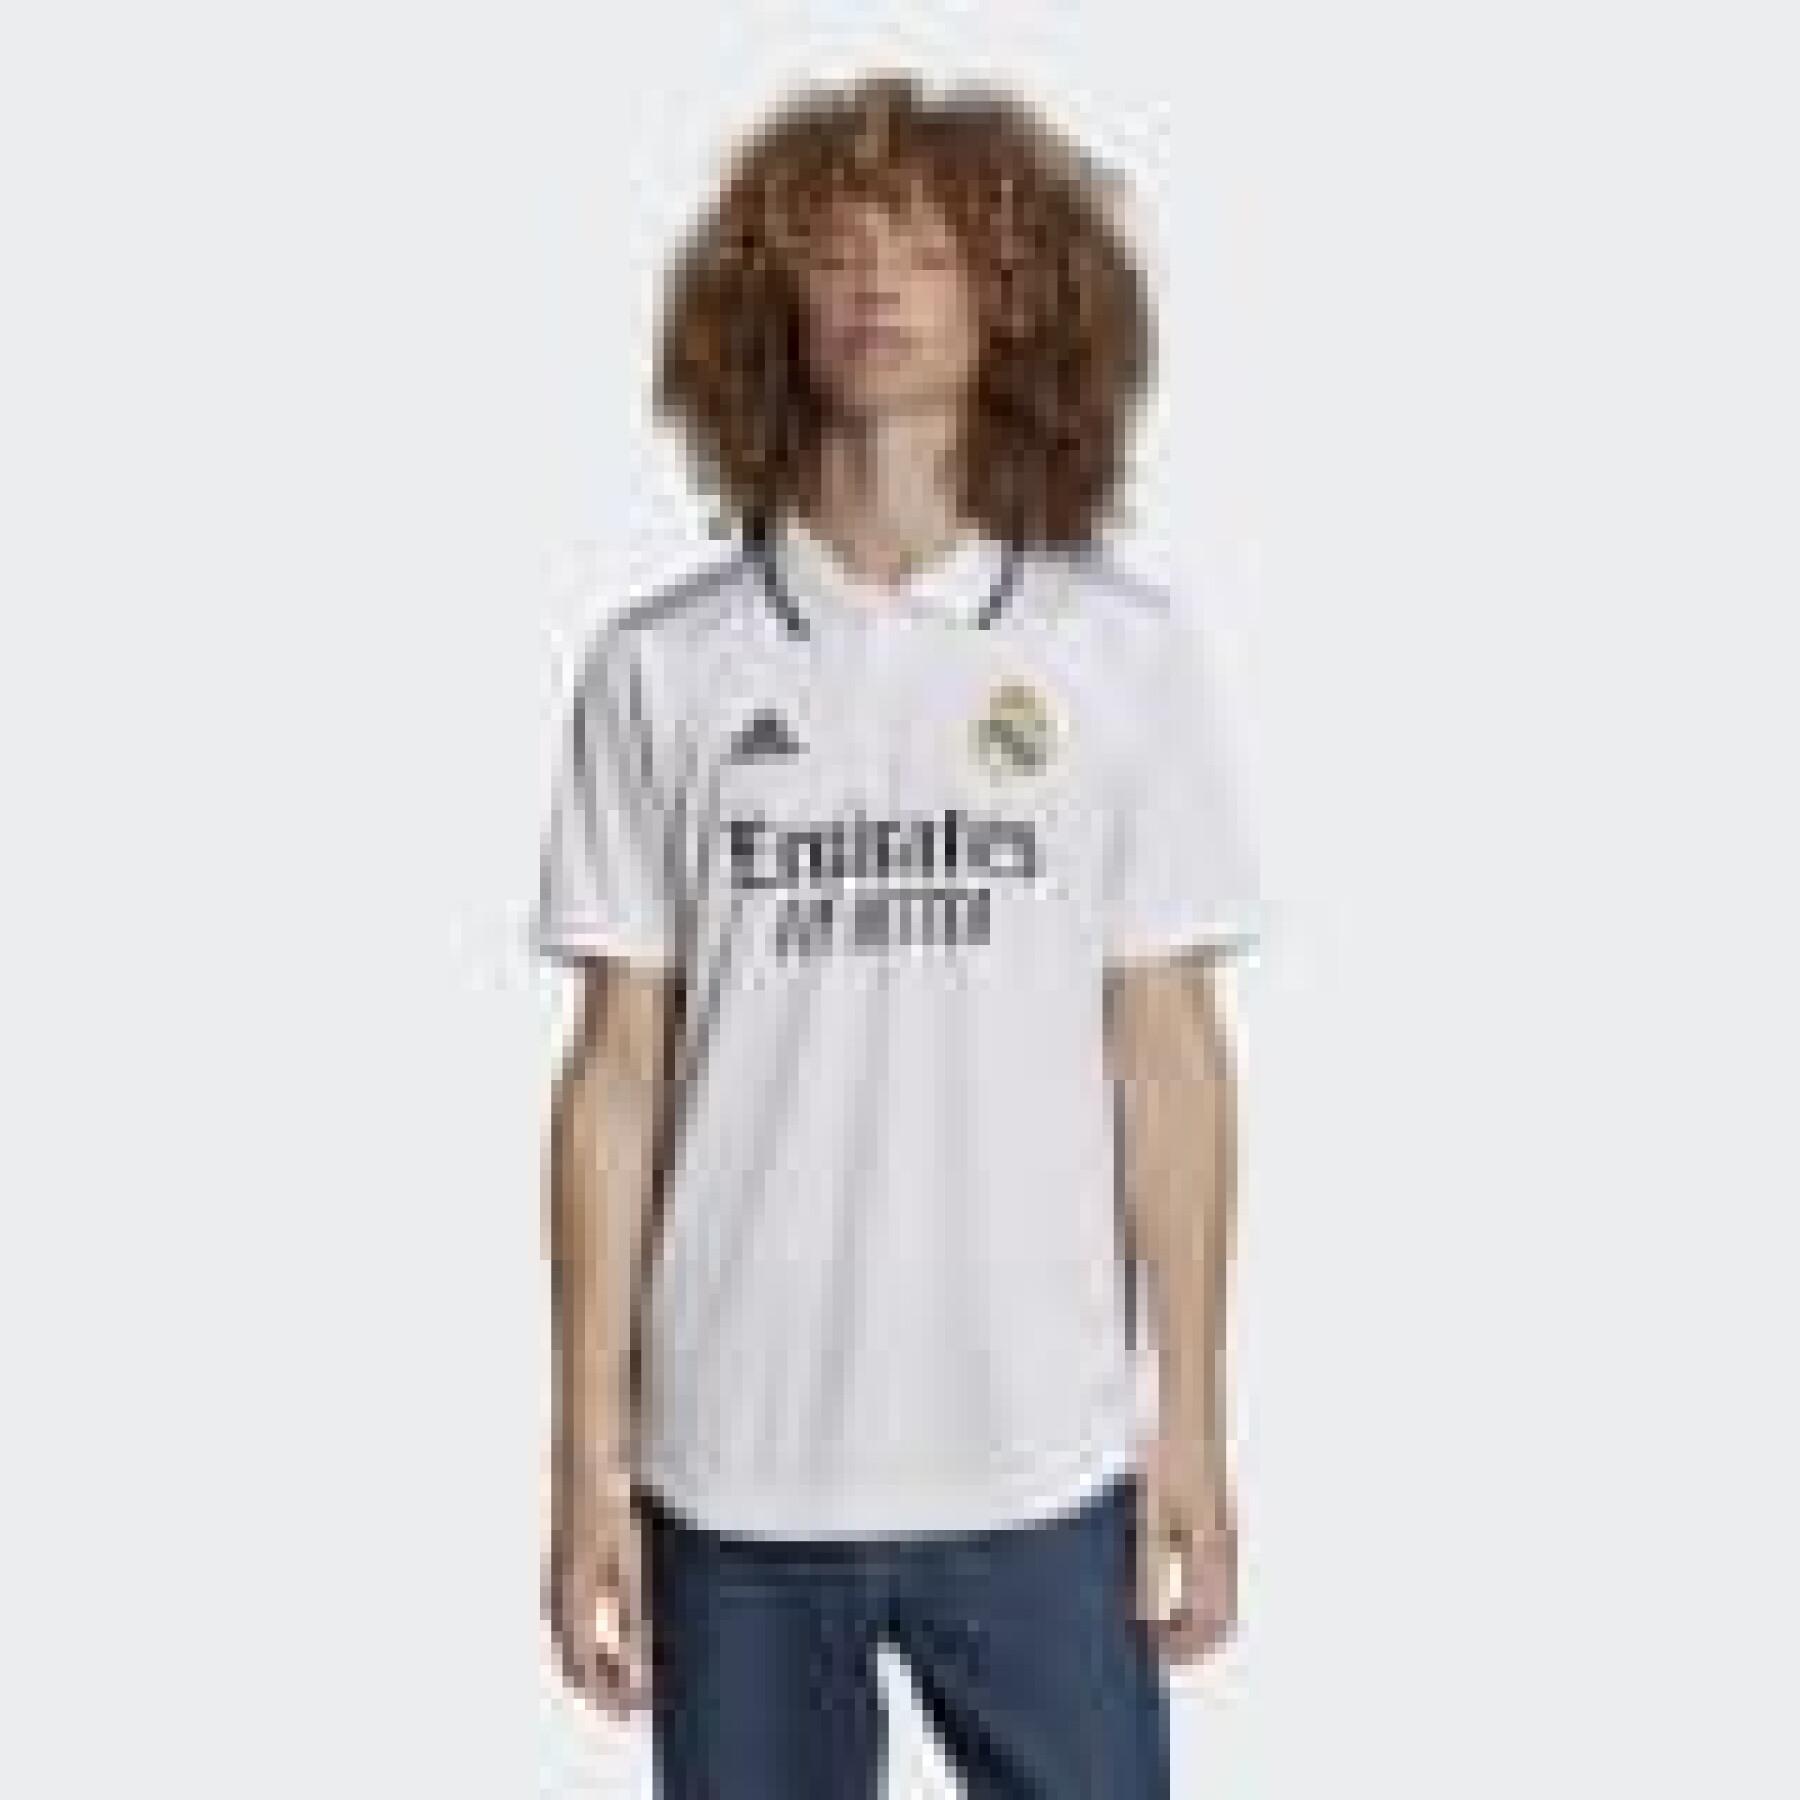 Authentic home jersey Real Madrid 2022/23